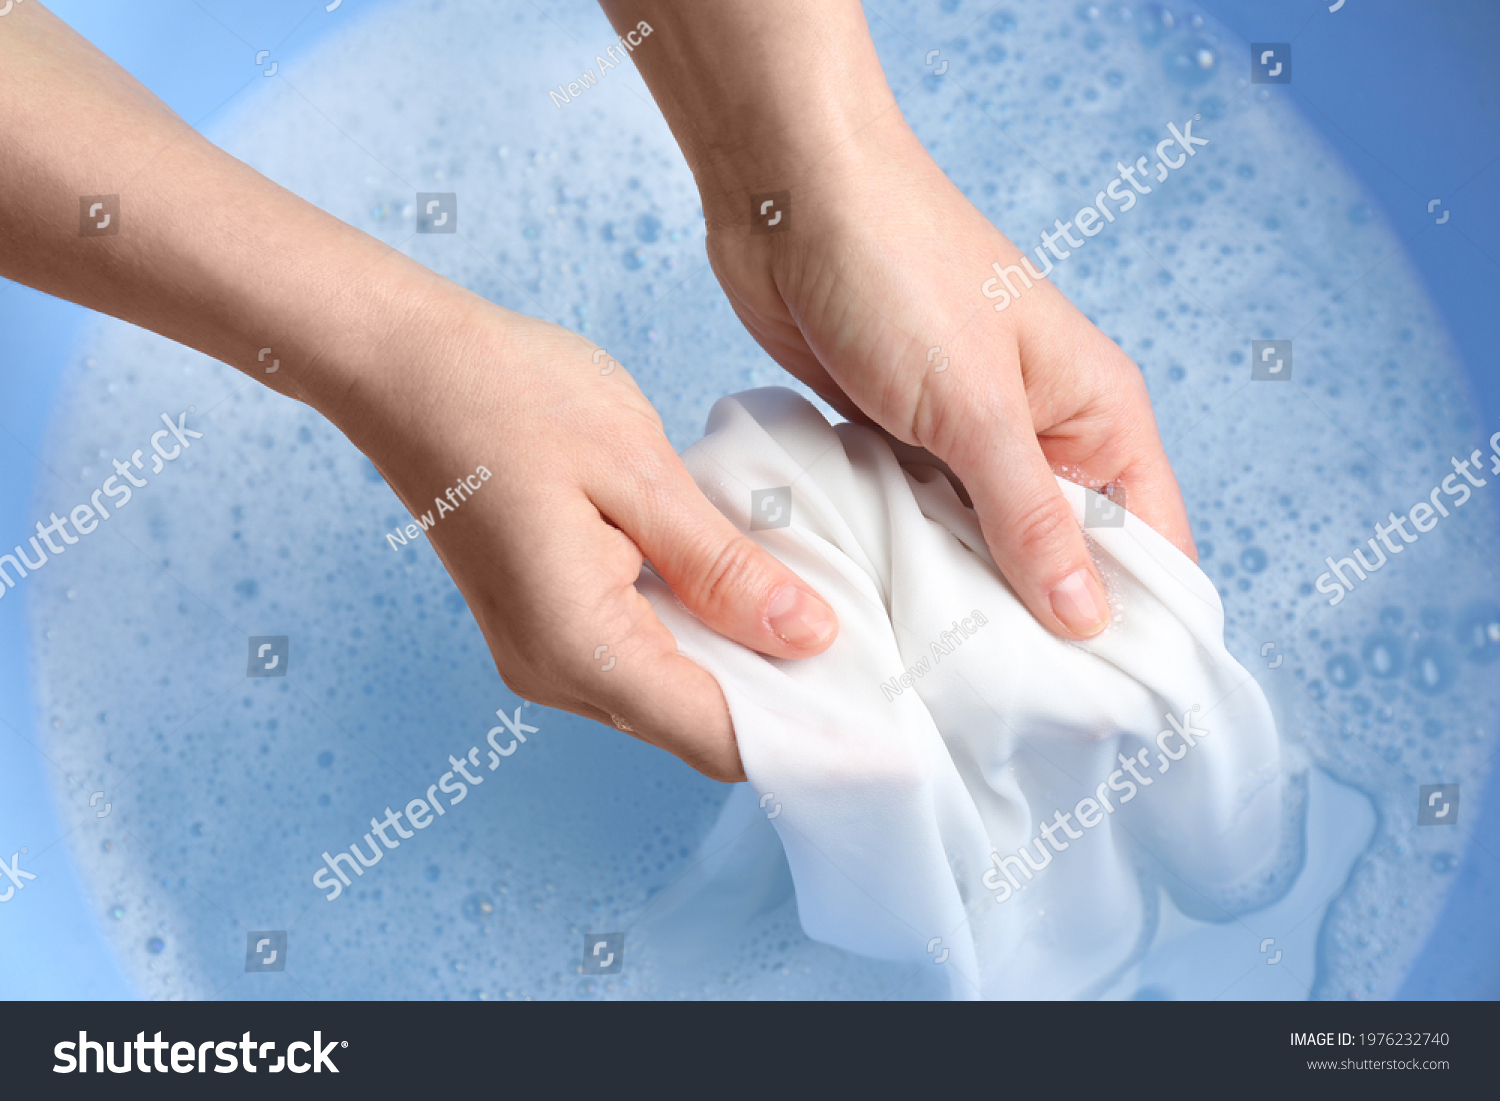 Top view of woman hand washing white clothing in suds, closeup #1976232740